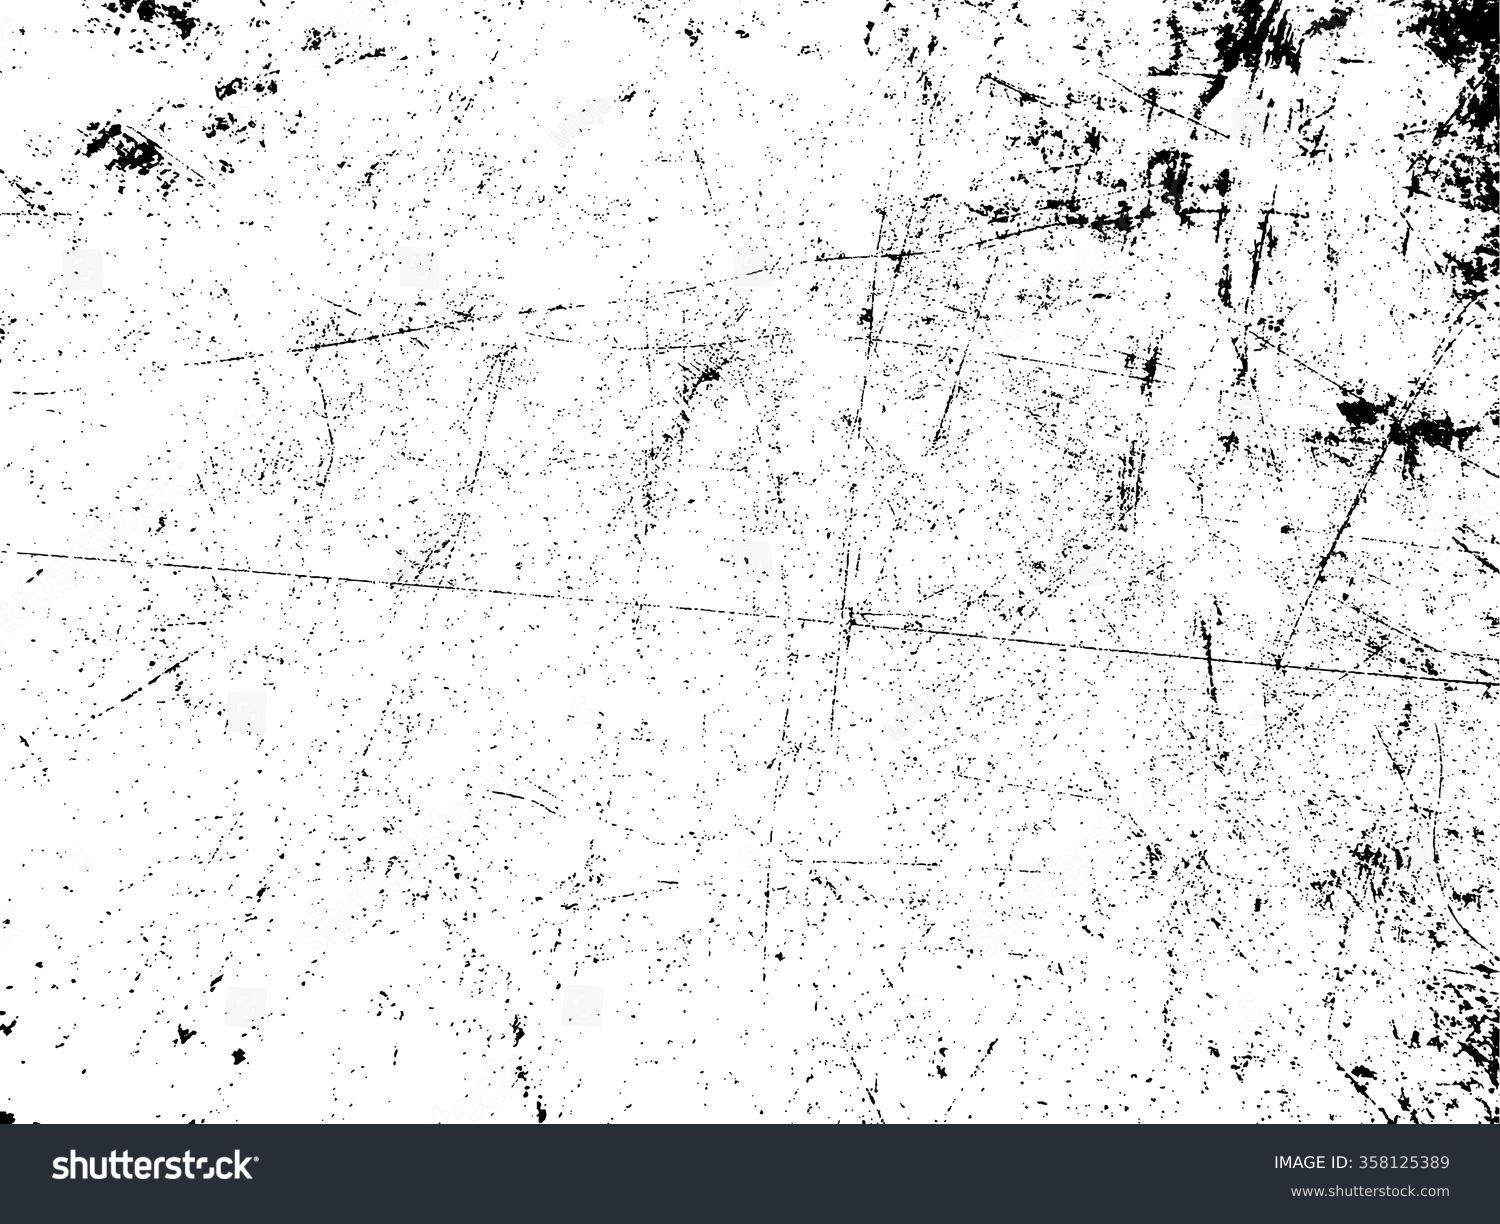 Grunge Urban Background.Texture Vector.Dust Overlay Distress Grain ,Simply Place illustration over any Object to Create grungy Effect .abstract,splattered , dirty,poster for your design.  #358125389